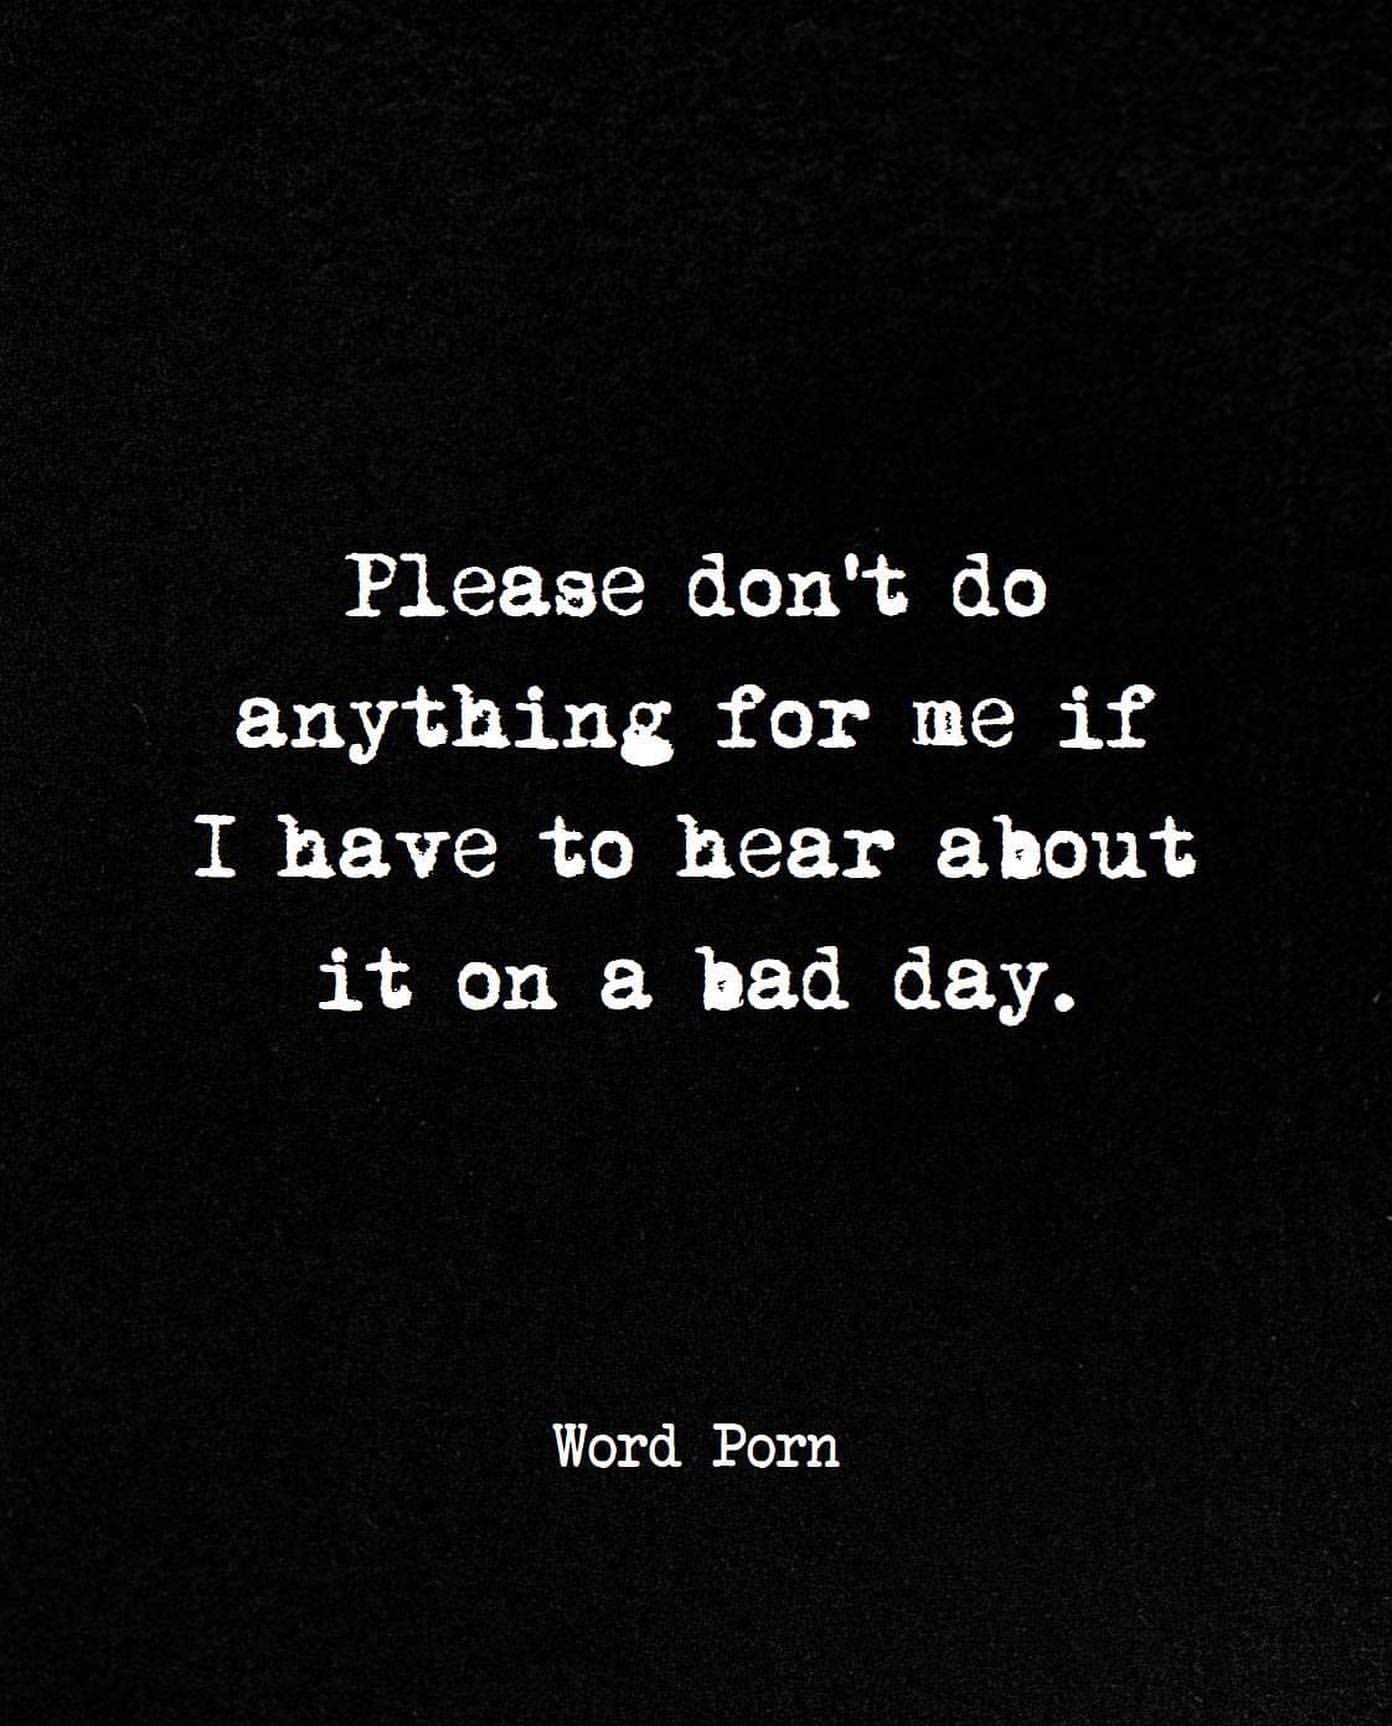 Please don't do anything for me if I have to hear about it on a bad day.